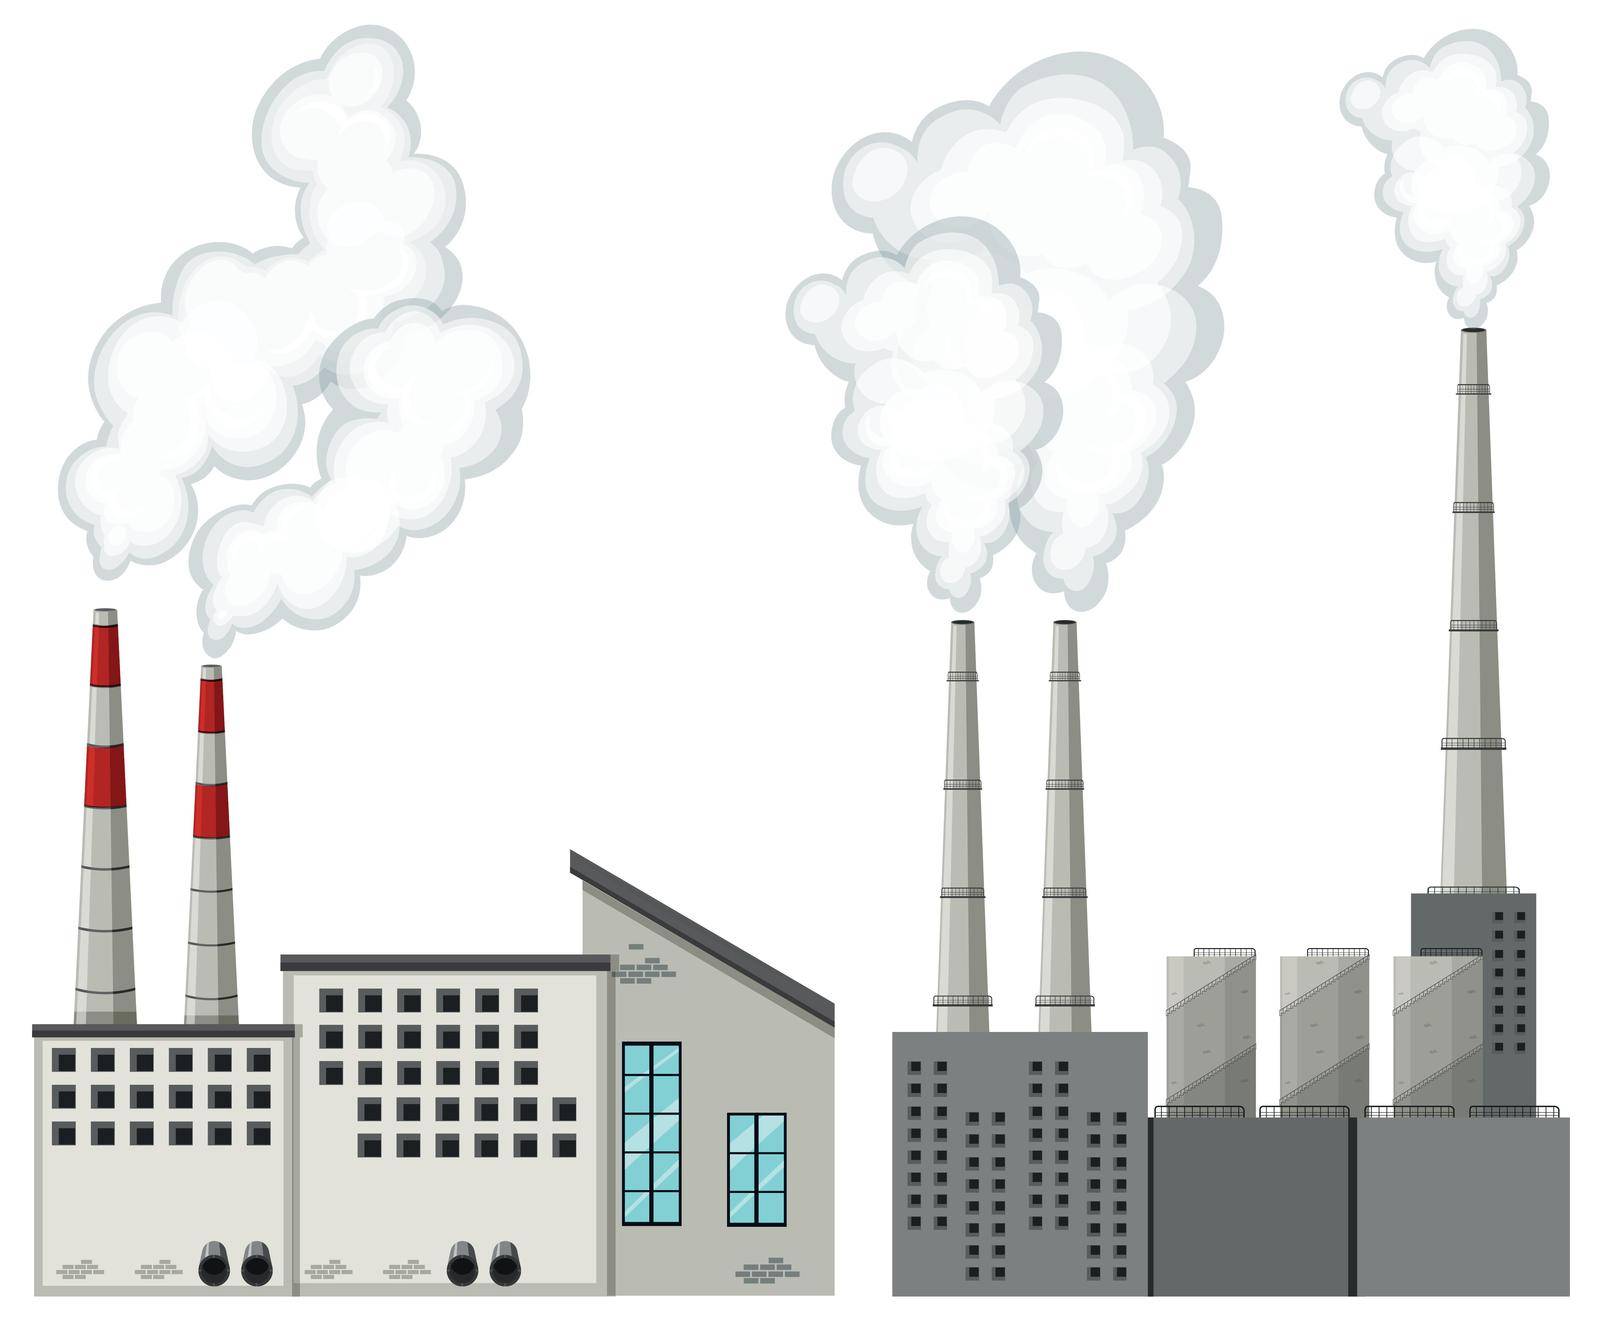 Factory buildings with tall chimneys illustration